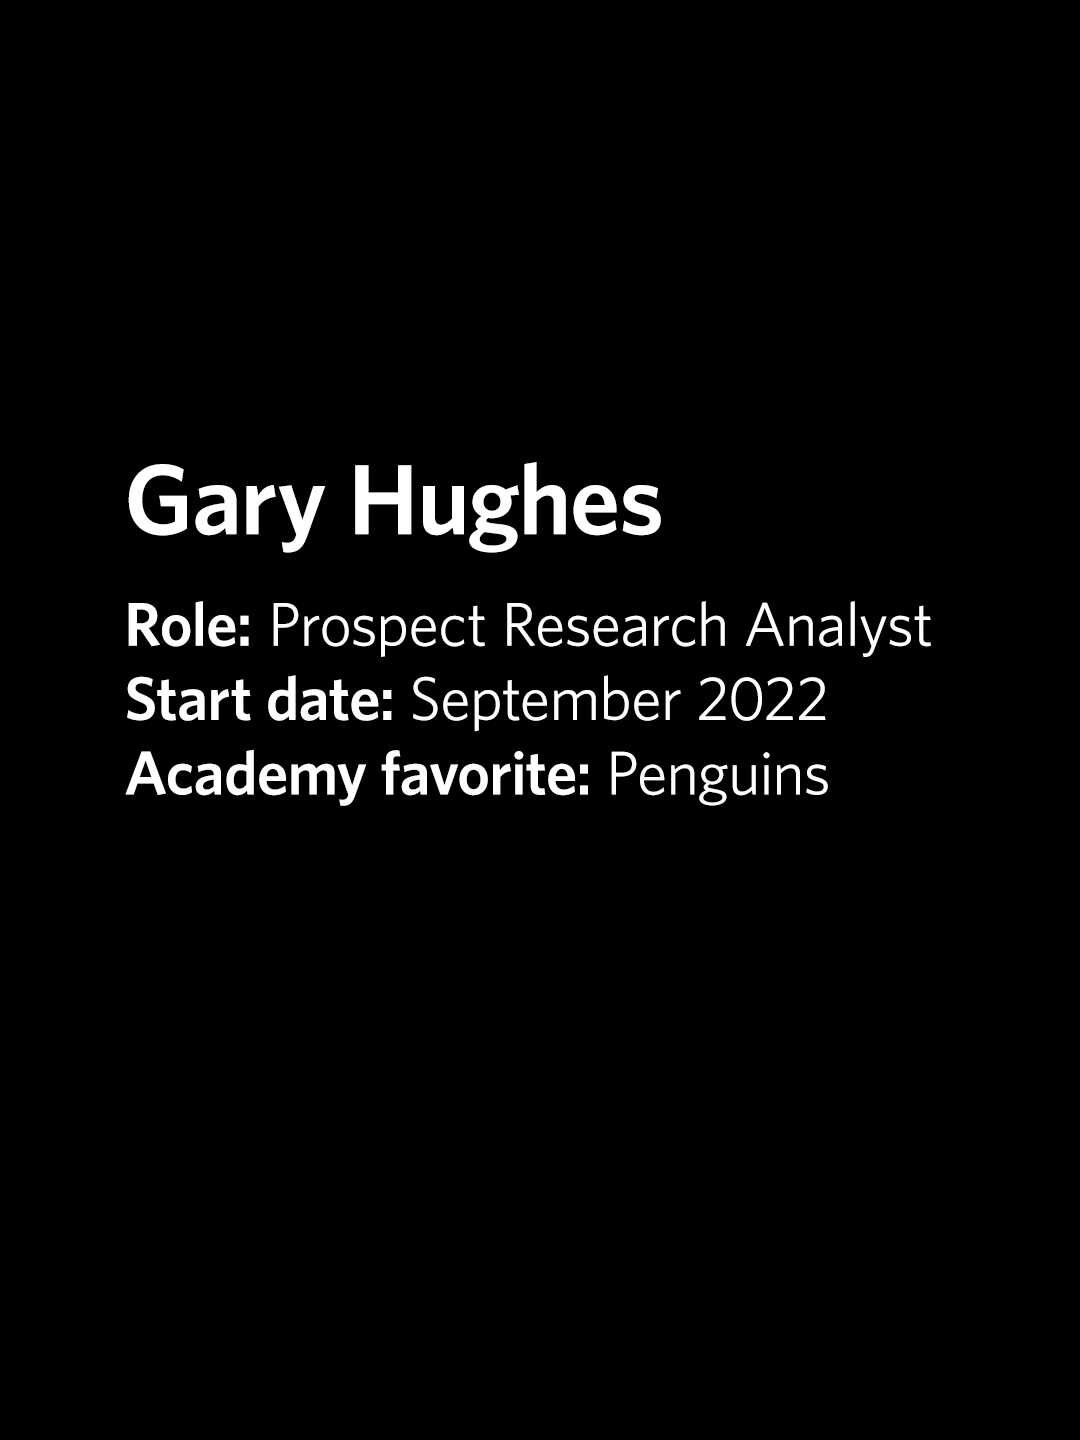 Gary Hughes, Prospect Research Analyst at the Academy, started Sept. 2022, favorite exhibit is penguins